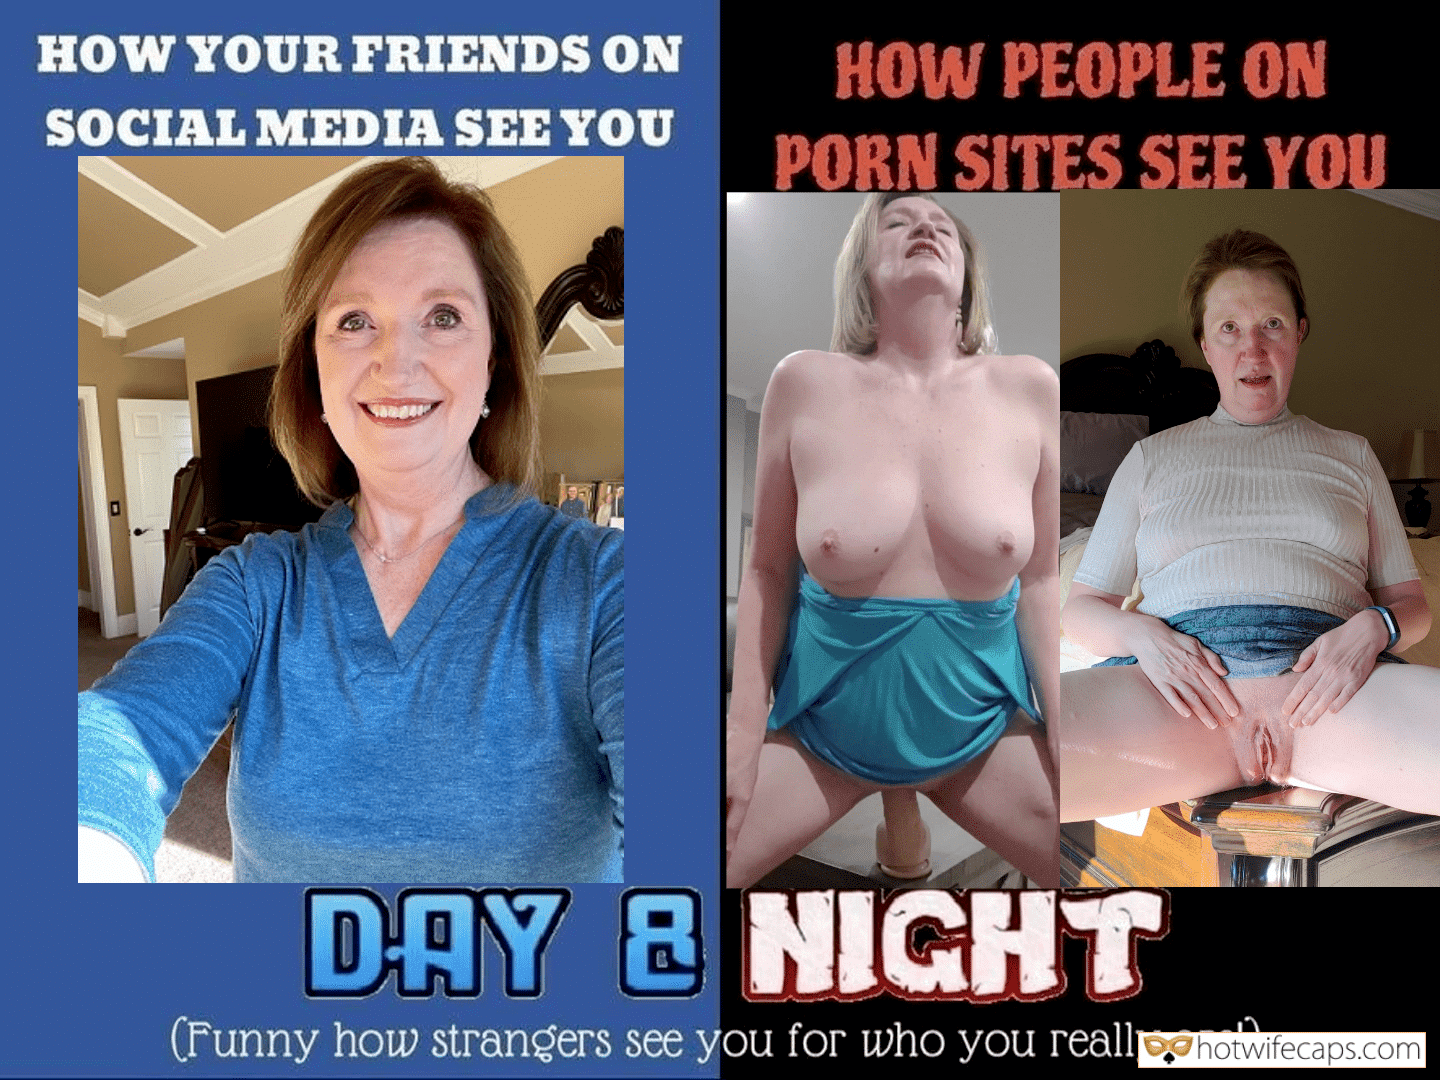 Friends Flashing Bottomless hotwife caption: HOW DO YOUR FRIENDS ON SOCIAL MEDIA SEE YOU. HOW DO PEOPLE ON PORN SITES SEE YOU. DAY 8 NIGHT (Funny how strangers see you for who you really are!) caption cheap used slut Day Night Mature Slut Susan New